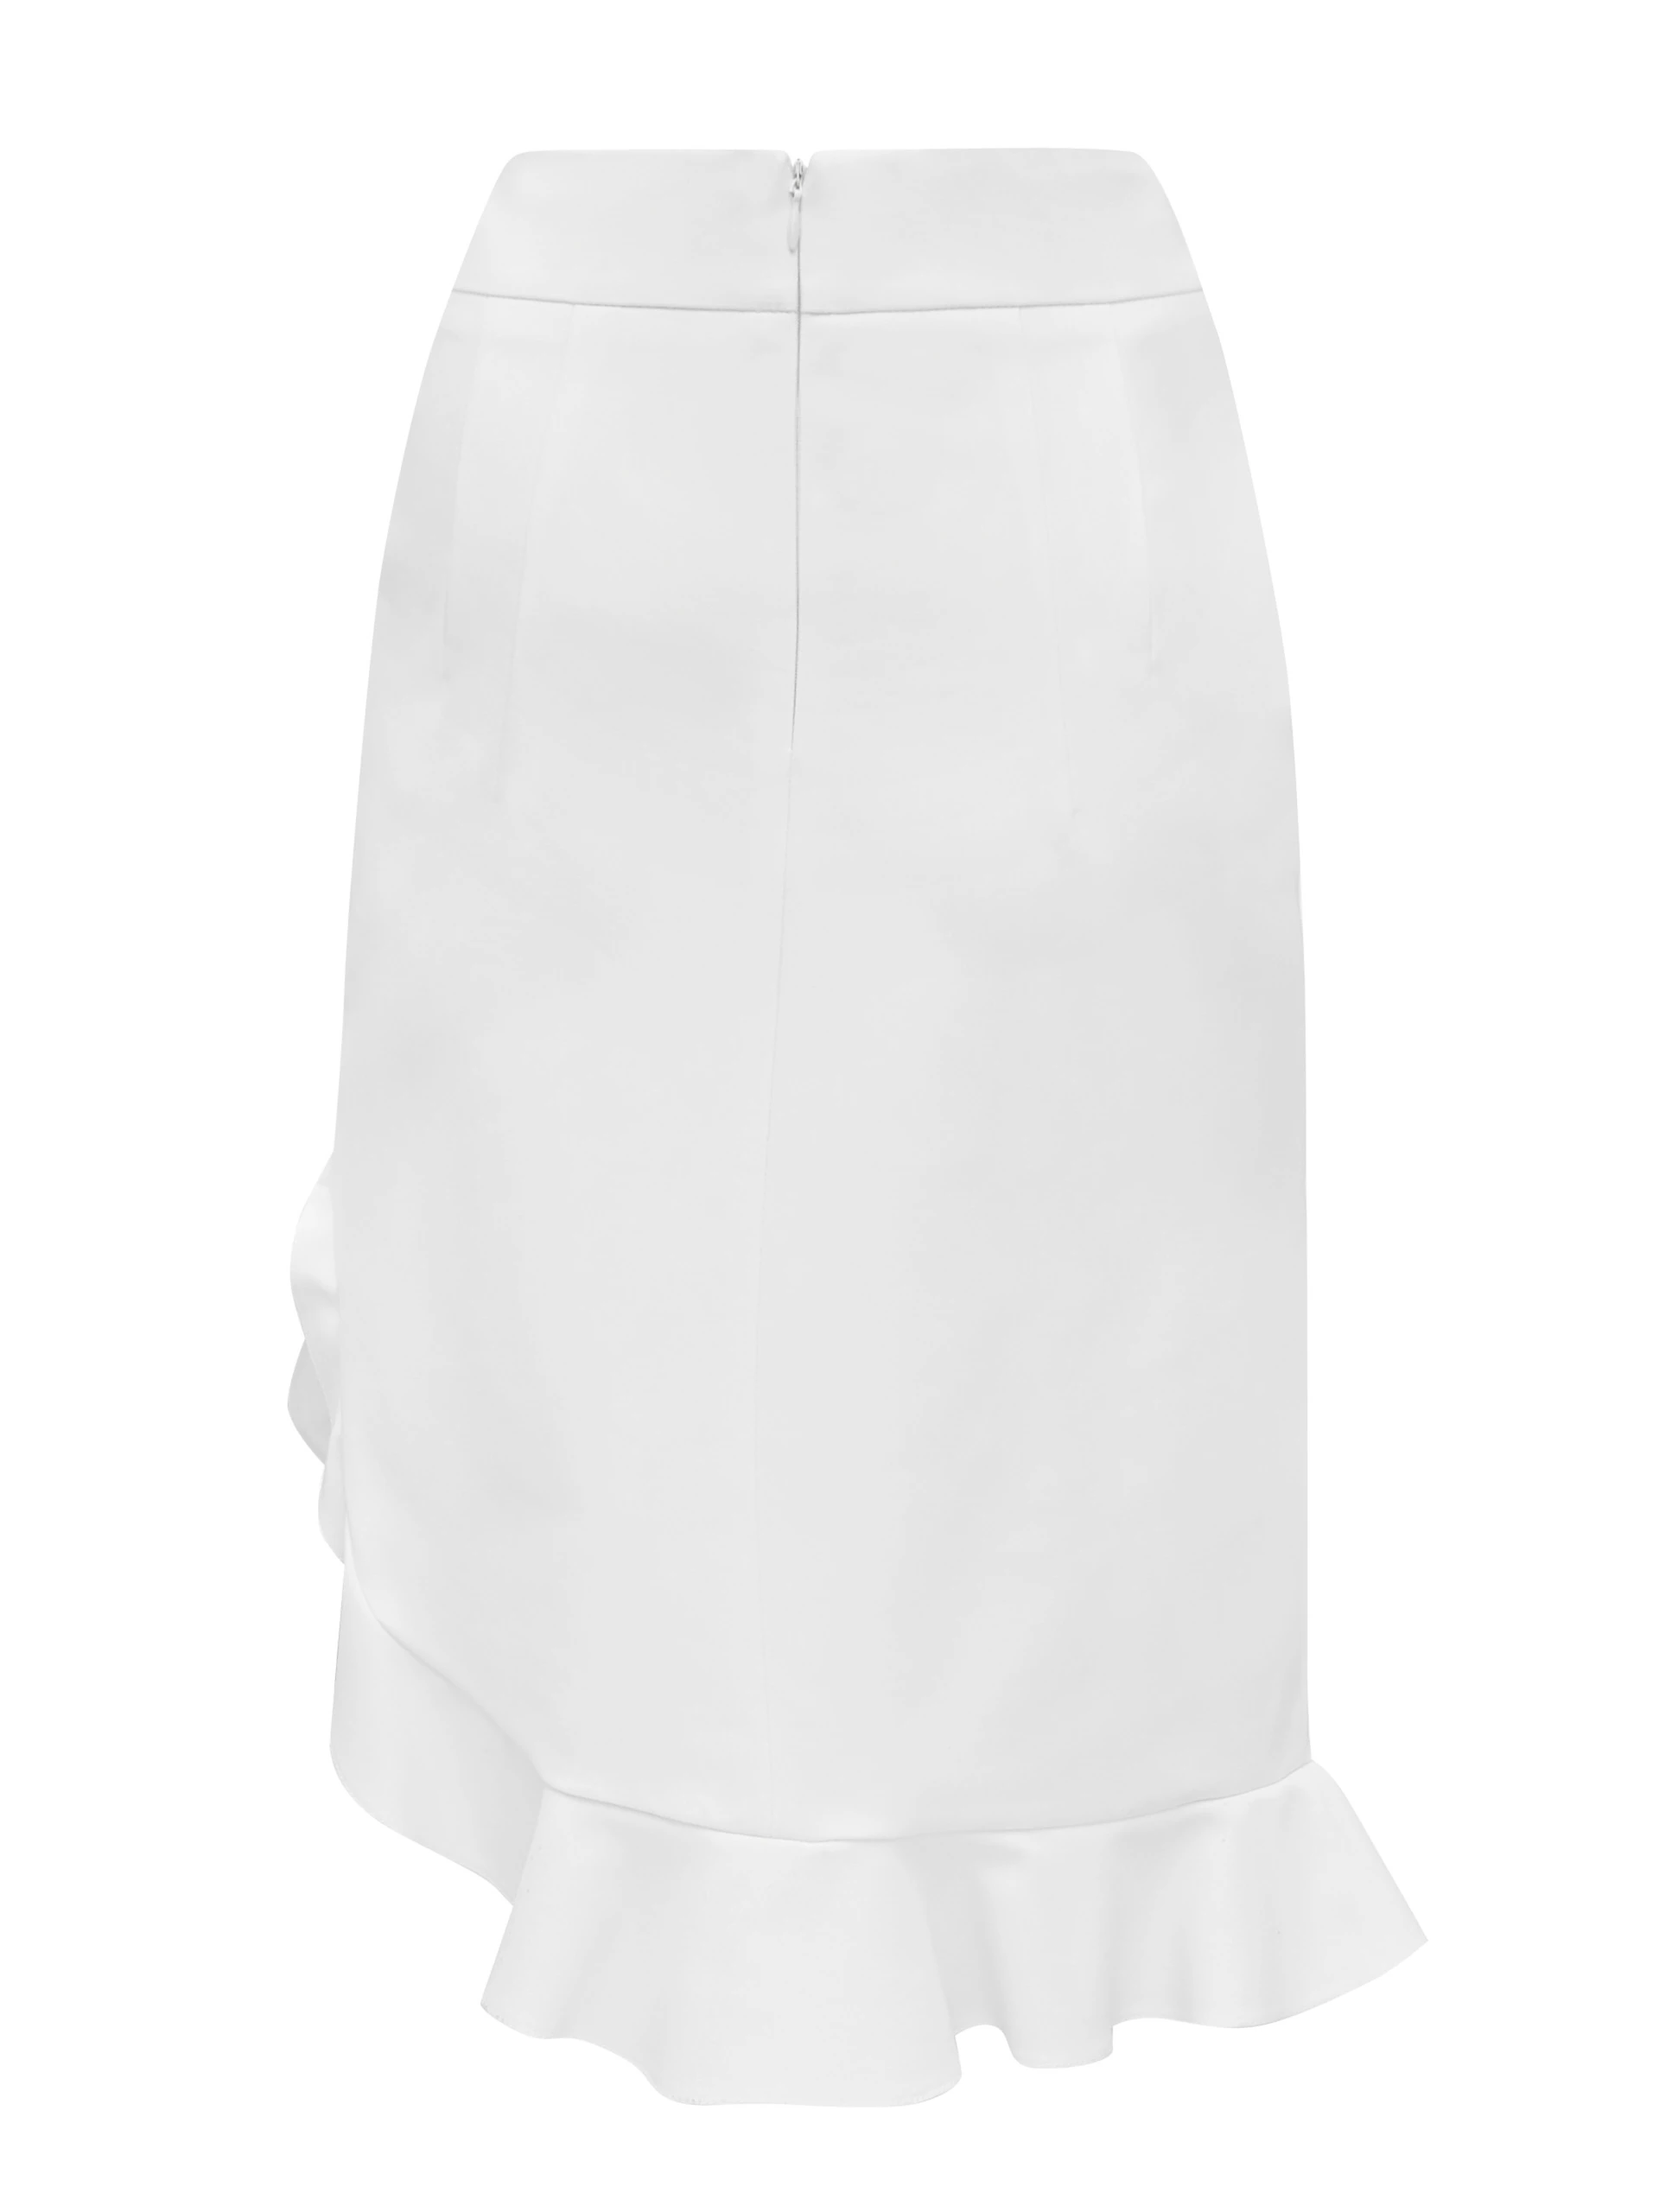 FITTED SKIRT WITH RUFFLE AT THE BOTTOM